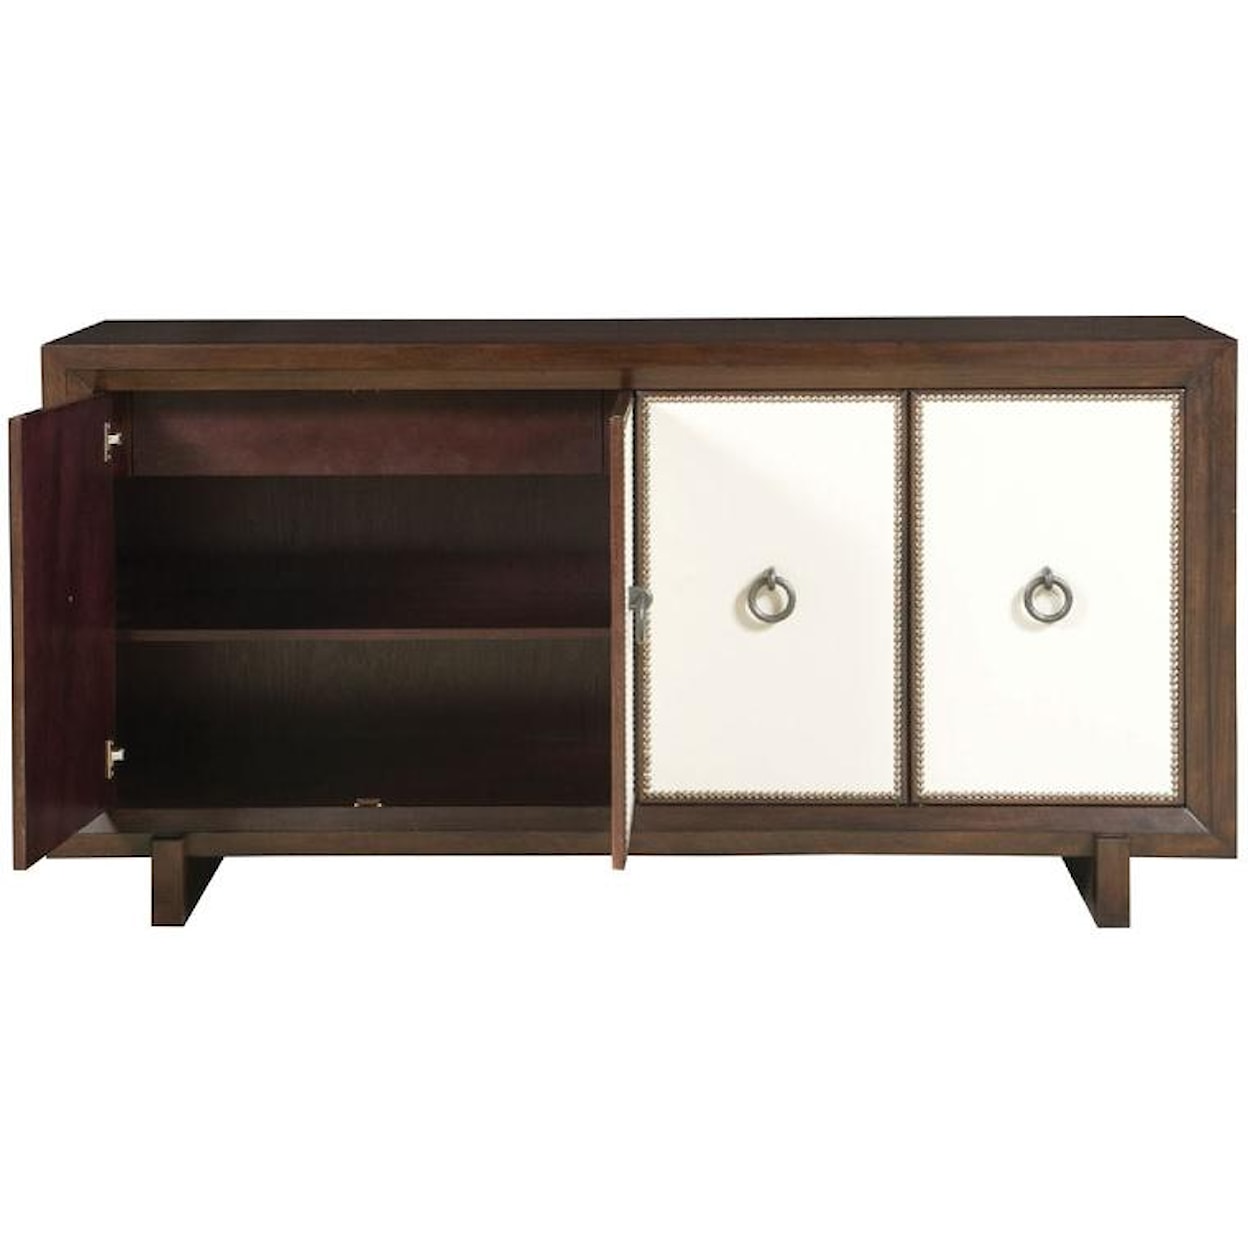 Vanguard Furniture Thom Filicia Home Collection Sideboard